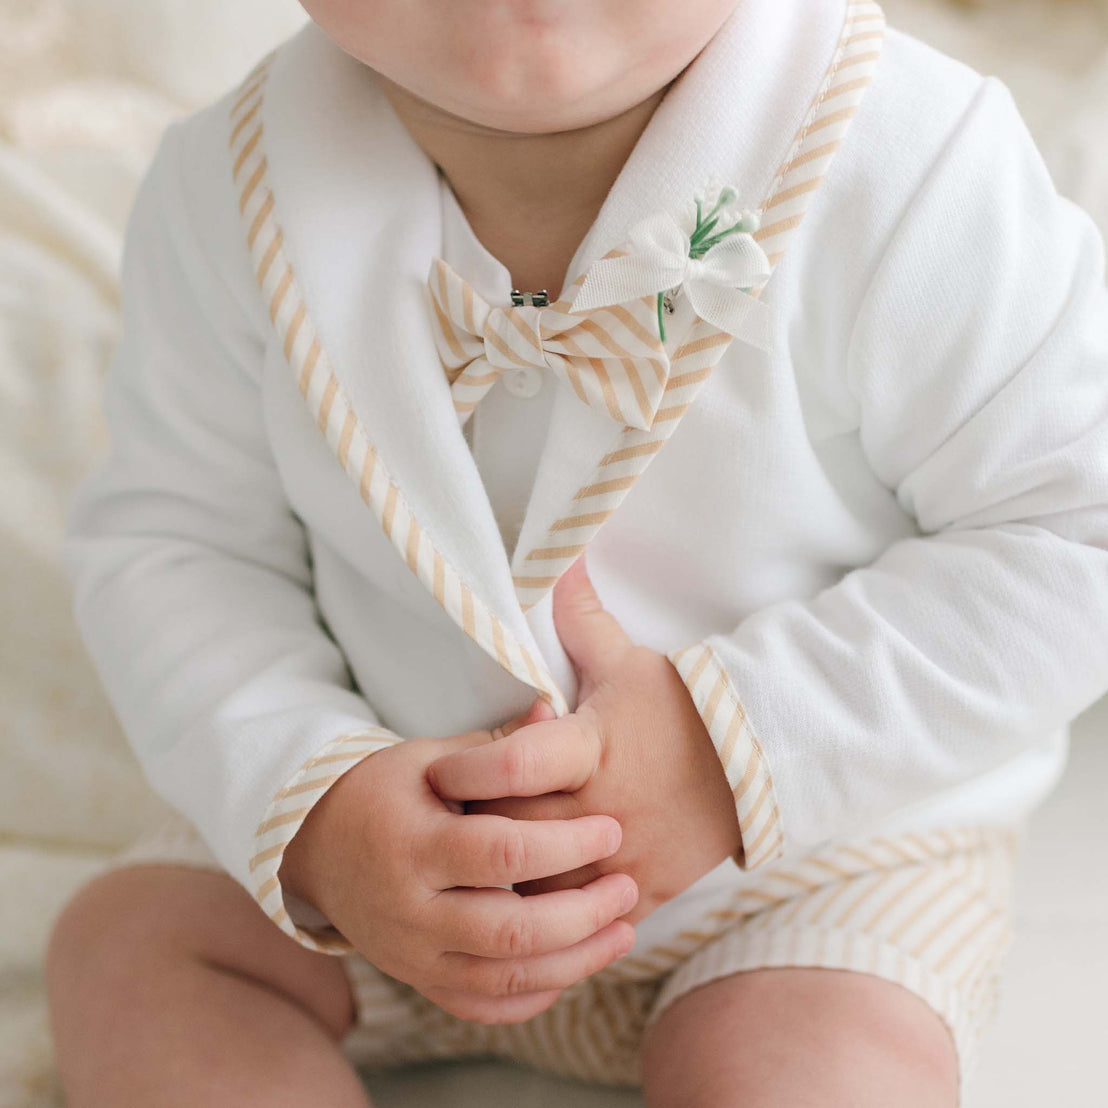 A baby is dressed in a white outfit with beige striped accents, including the Theodore Bow Tie & Boutonniere that features a handmade bow tie and trim. The baby’s hands are holding the lapel of the jacket, adorned with a boutonniere secured by a locking pin. Only the lower part of the baby’s face is visible.